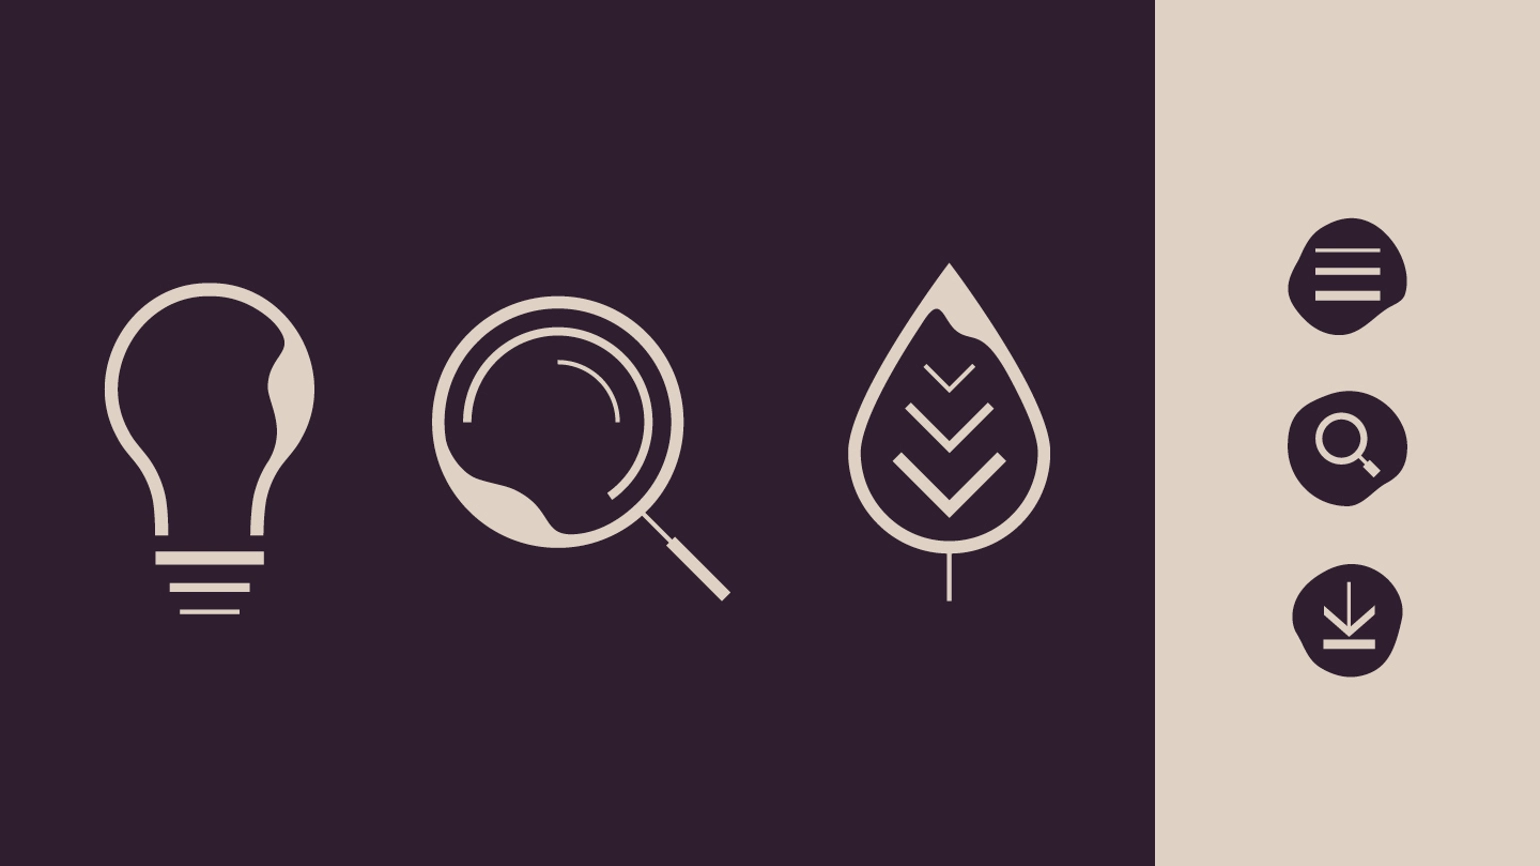 Icons, including a leaf and a magnifying glass on a dark purple background